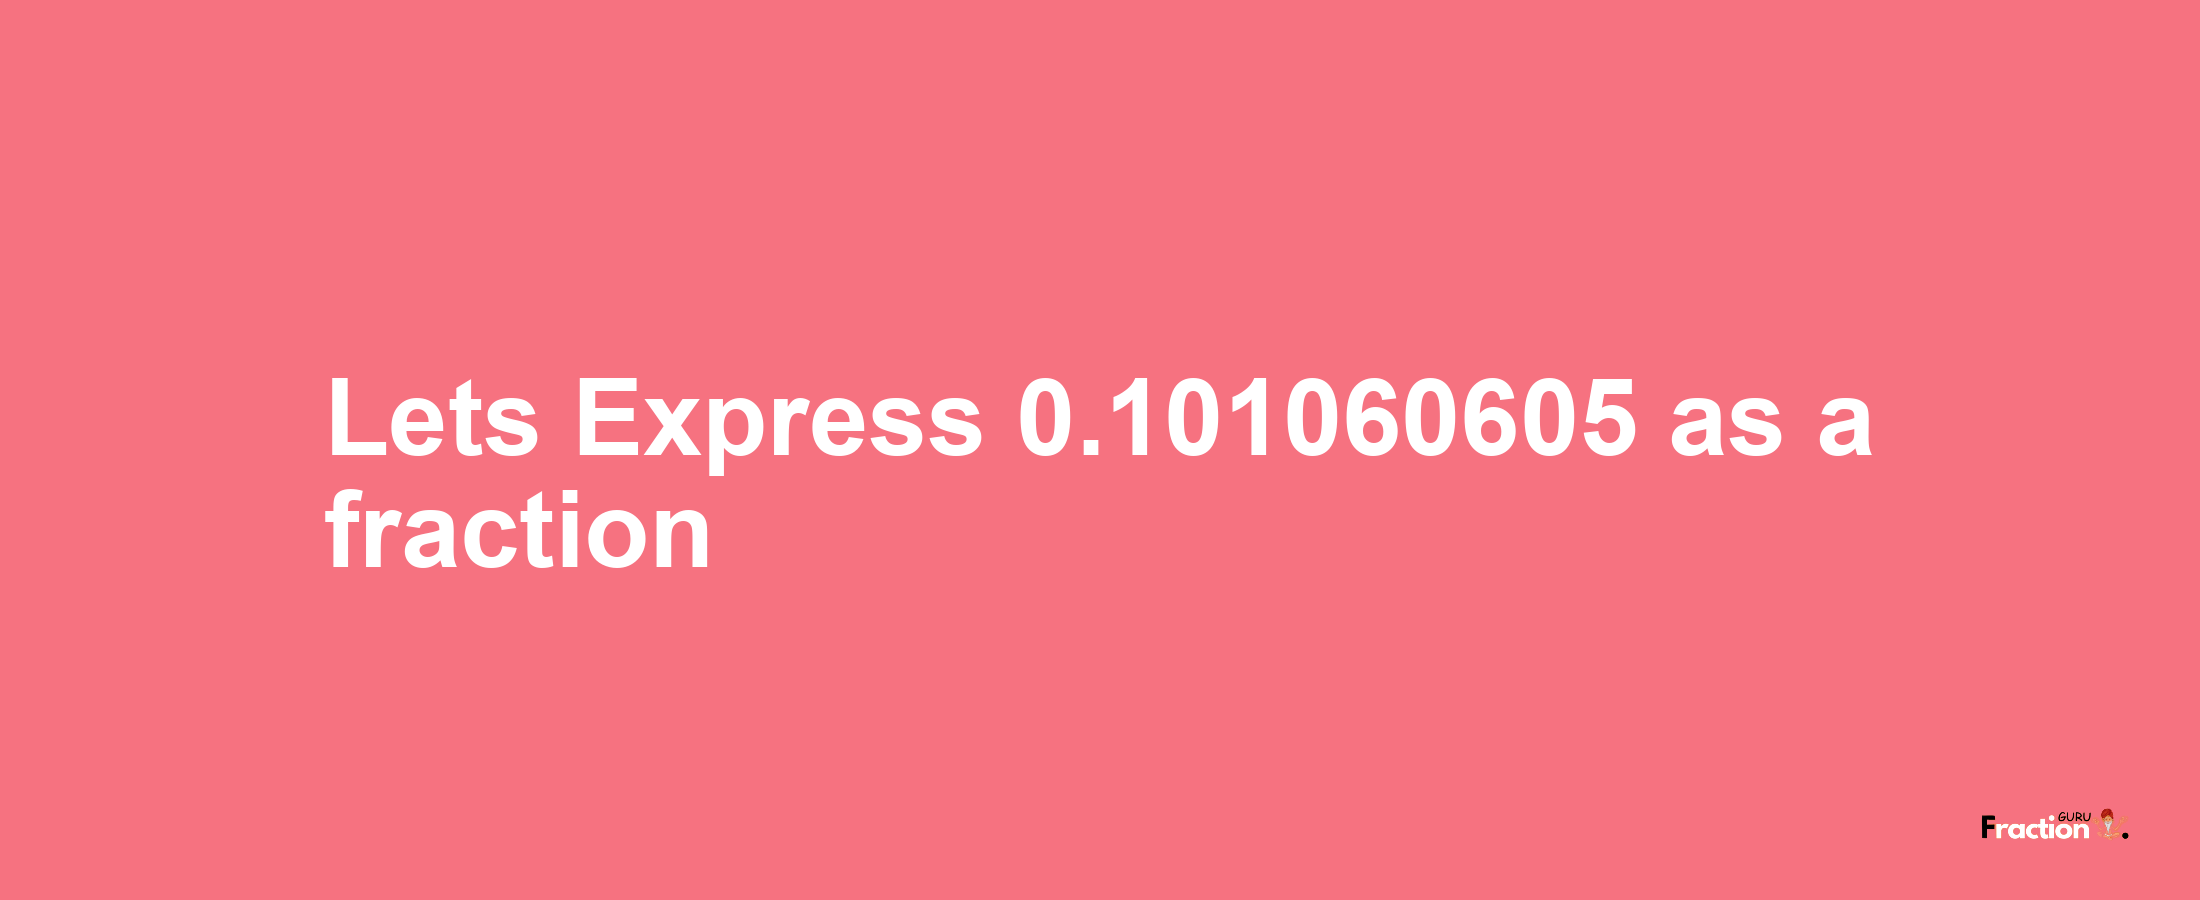 Lets Express 0.101060605 as afraction